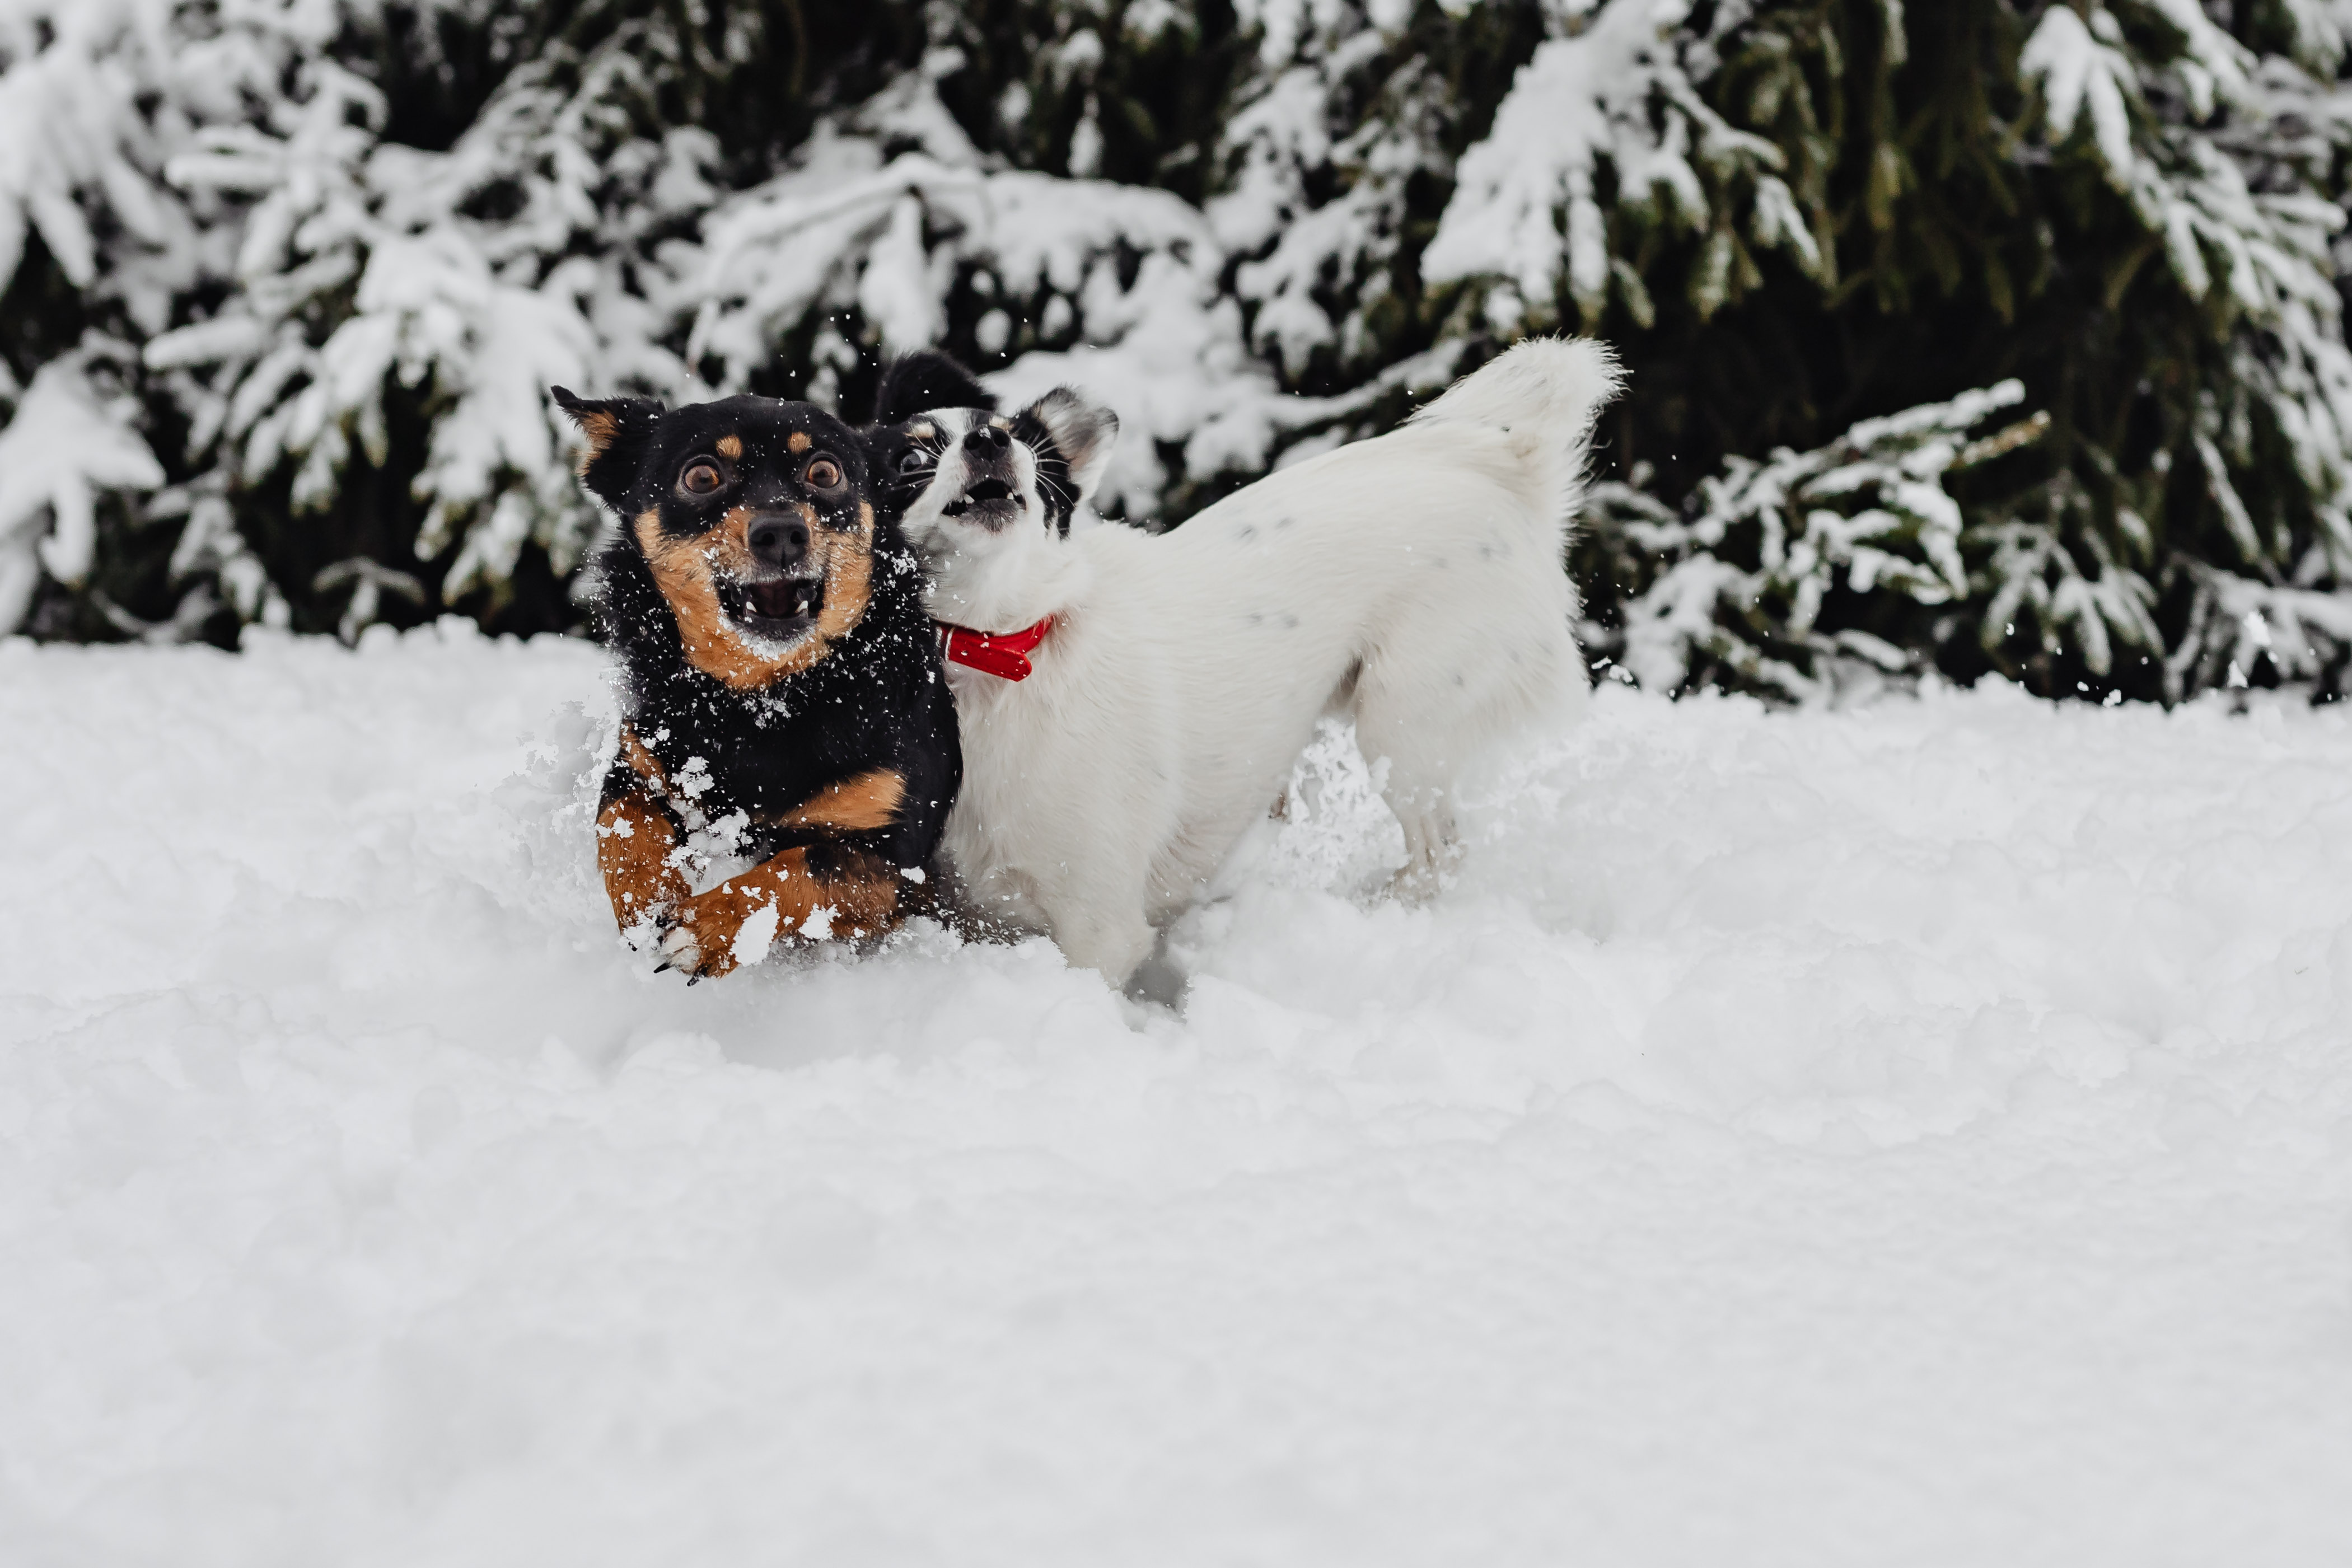 Two small dogs are playing on fresh snow